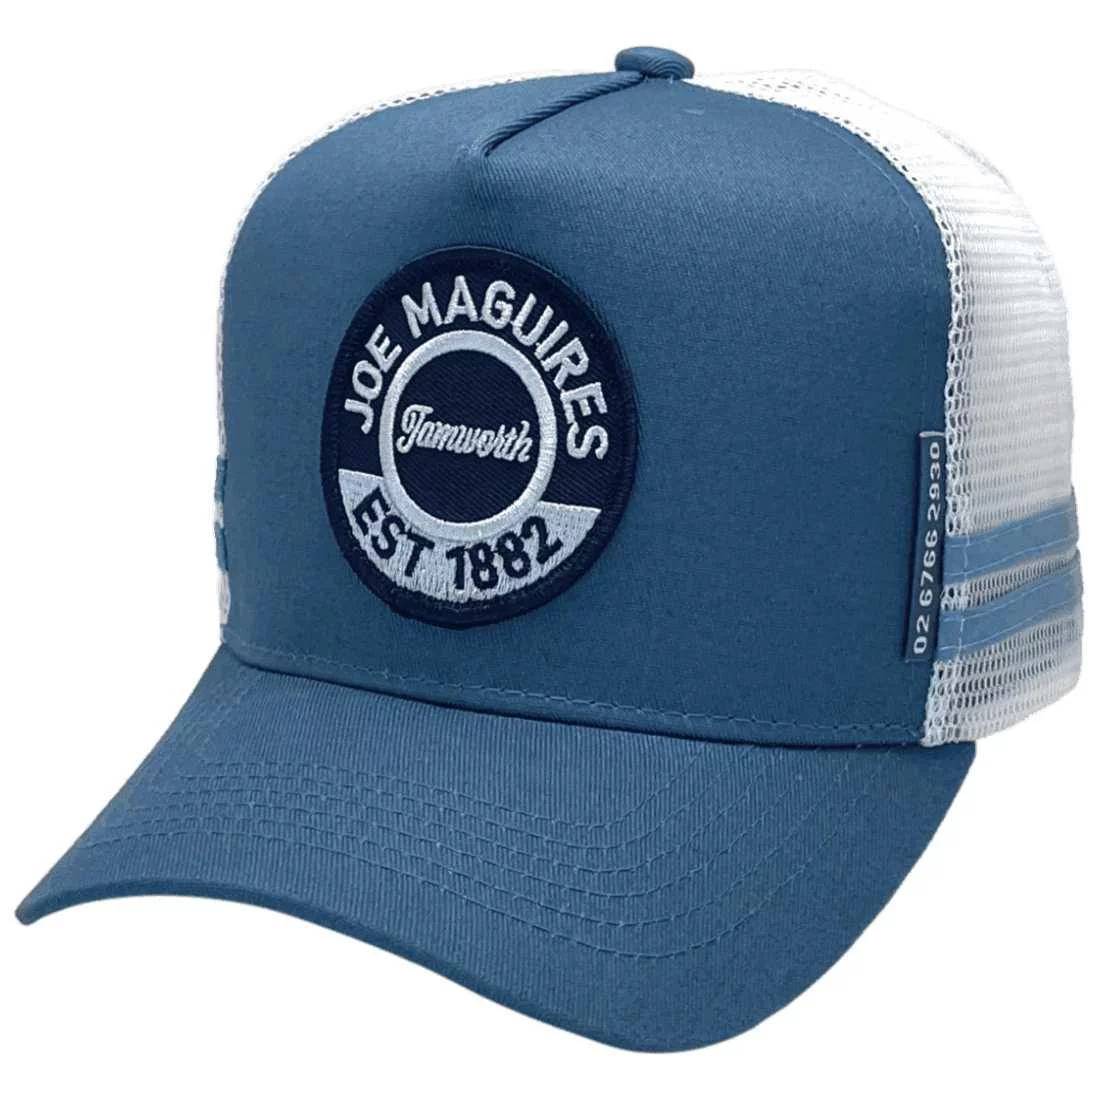 Joe Maguires Tamworth NSW HP Original Basic Aussie Trucker Hat with Australian Head Fit Crown and Double Sidebands Steel Blue